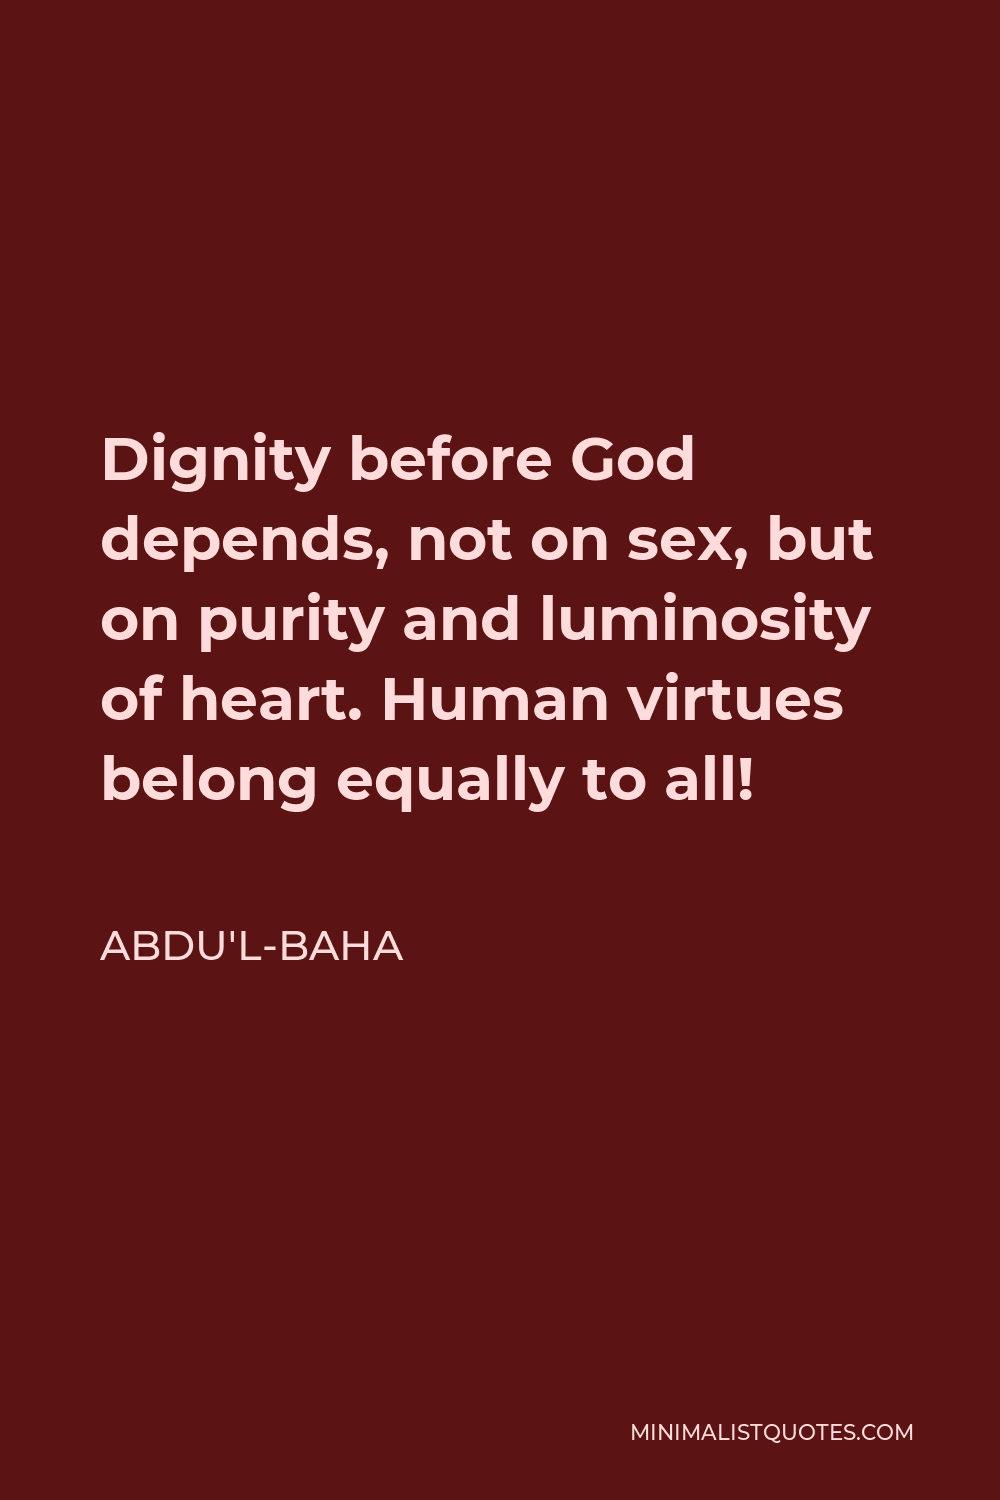 Abdu'l-Baha Quote - Dignity before God depends, not on sex, but on purity and luminosity of heart. Human virtues belong equally to all!